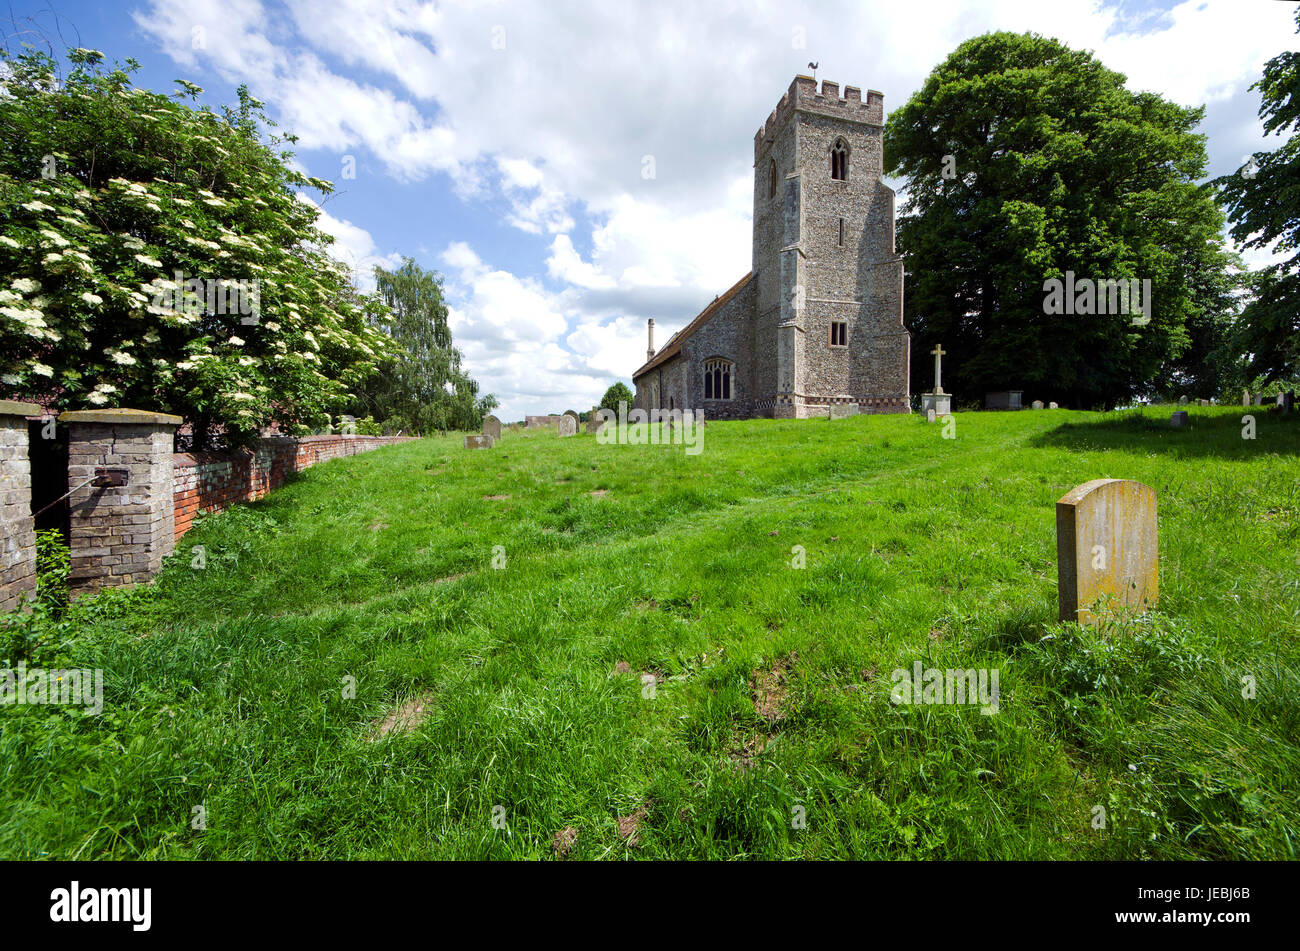 The Parish Church of St Andrews in the Essex village of Bulmer 4 miles west of Sudbury Dates from the 12th century with a 15th Century tower Stock Photo